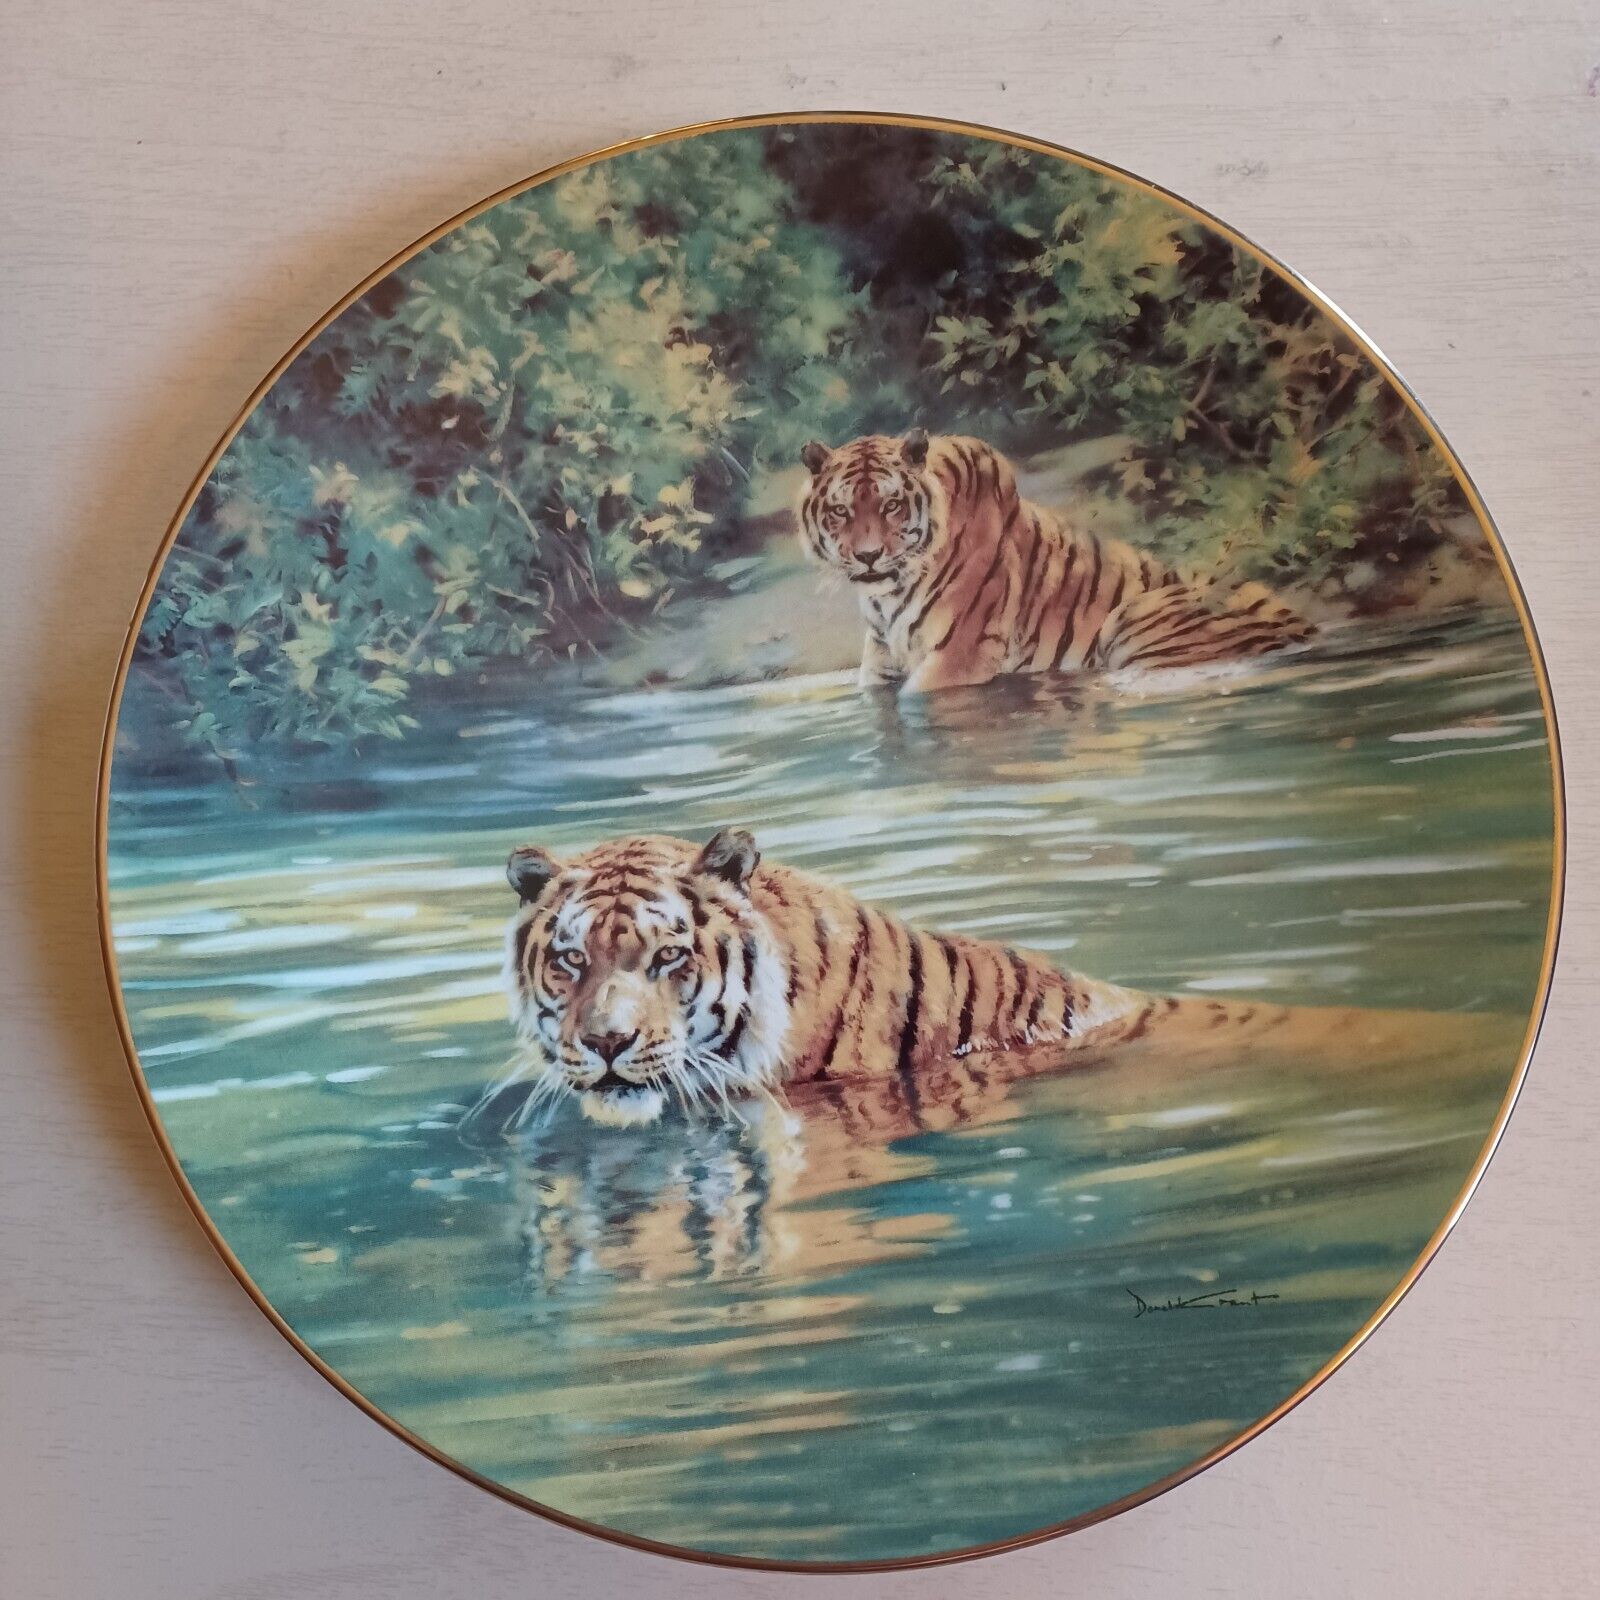 Bradex, Limited Edition "cool Cats" Donald Grant, Decorative Plate, #2871b